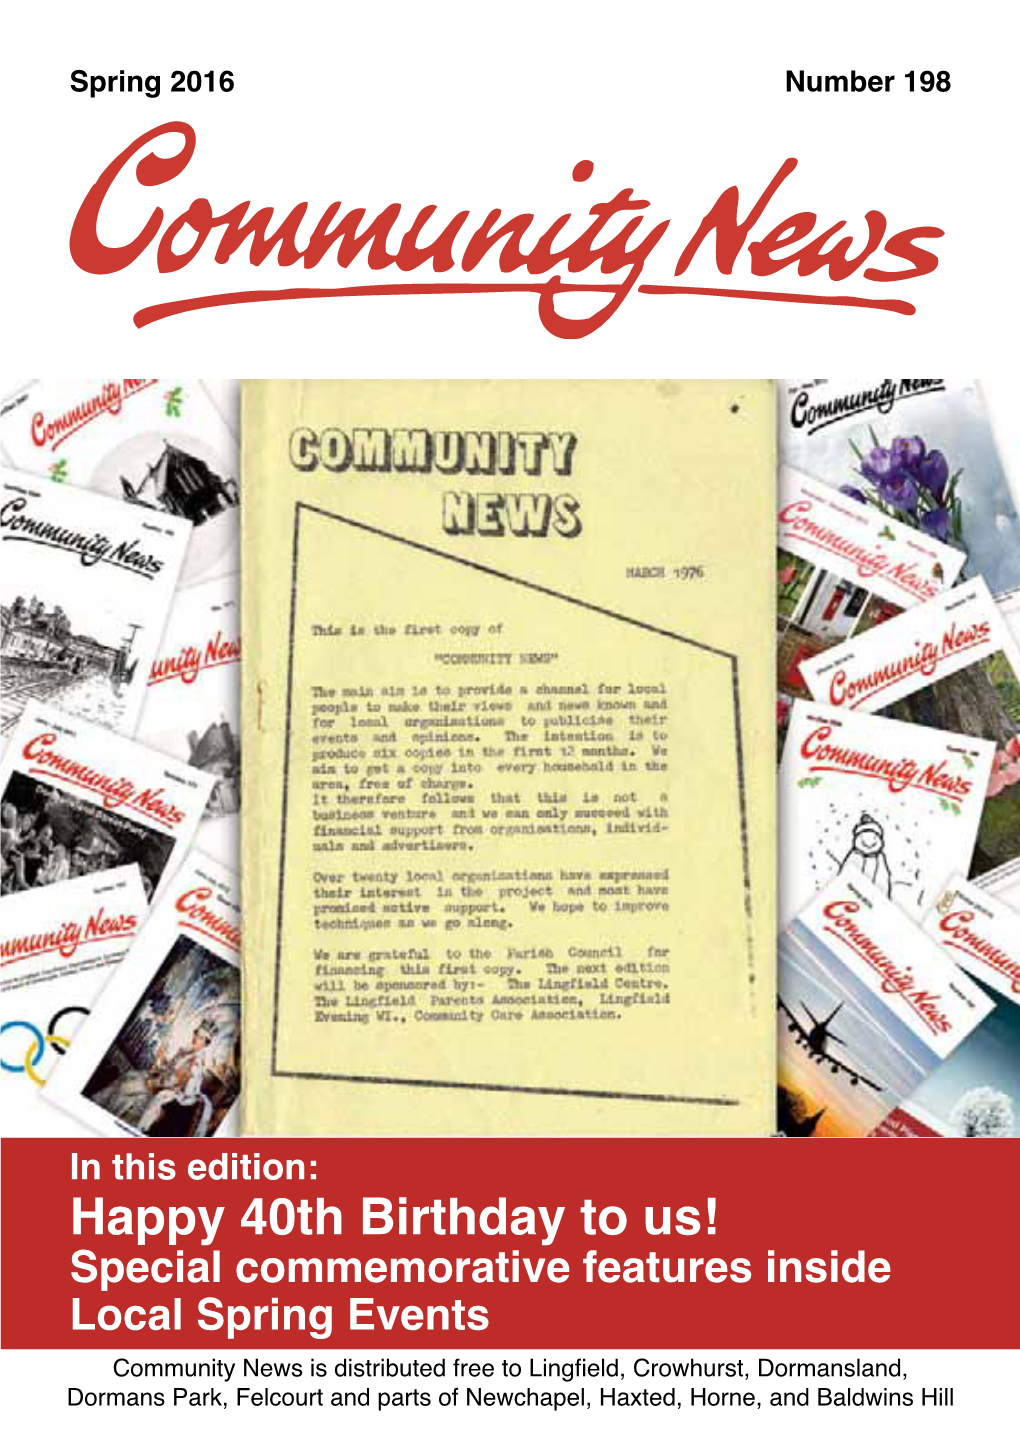 Community News 198 Spring 2016.Qxp Layout 1 17/01/2016 20:55 Page 1